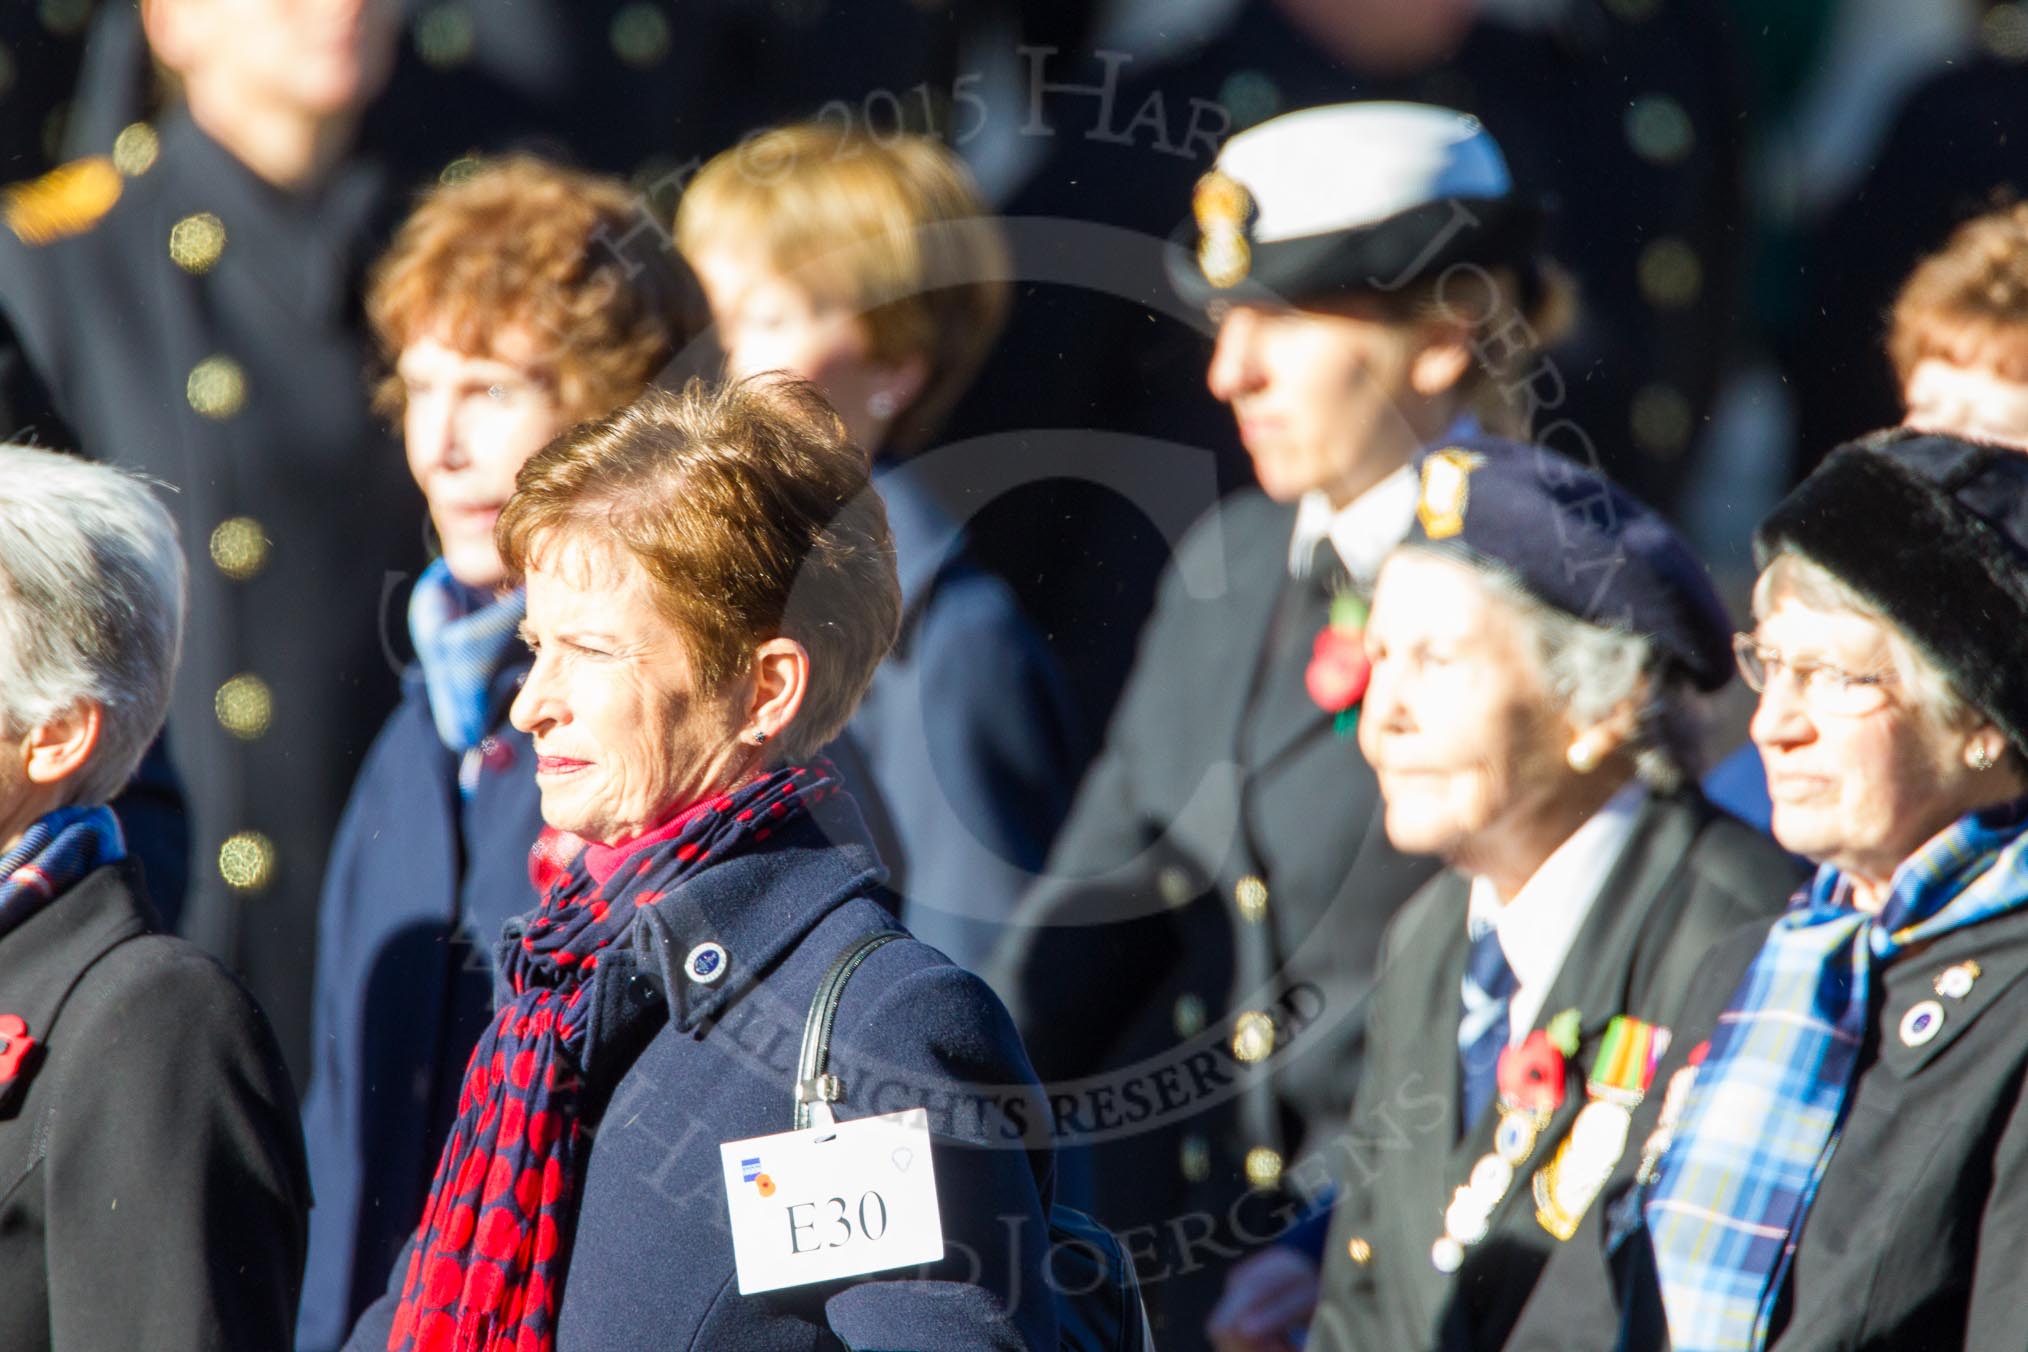 Remembrance Sunday Cenotaph March Past 2013: E30 - Association of WRENS..
Press stand opposite the Foreign Office building, Whitehall, London SW1,
London,
Greater London,
United Kingdom,
on 10 November 2013 at 11:47, image #596